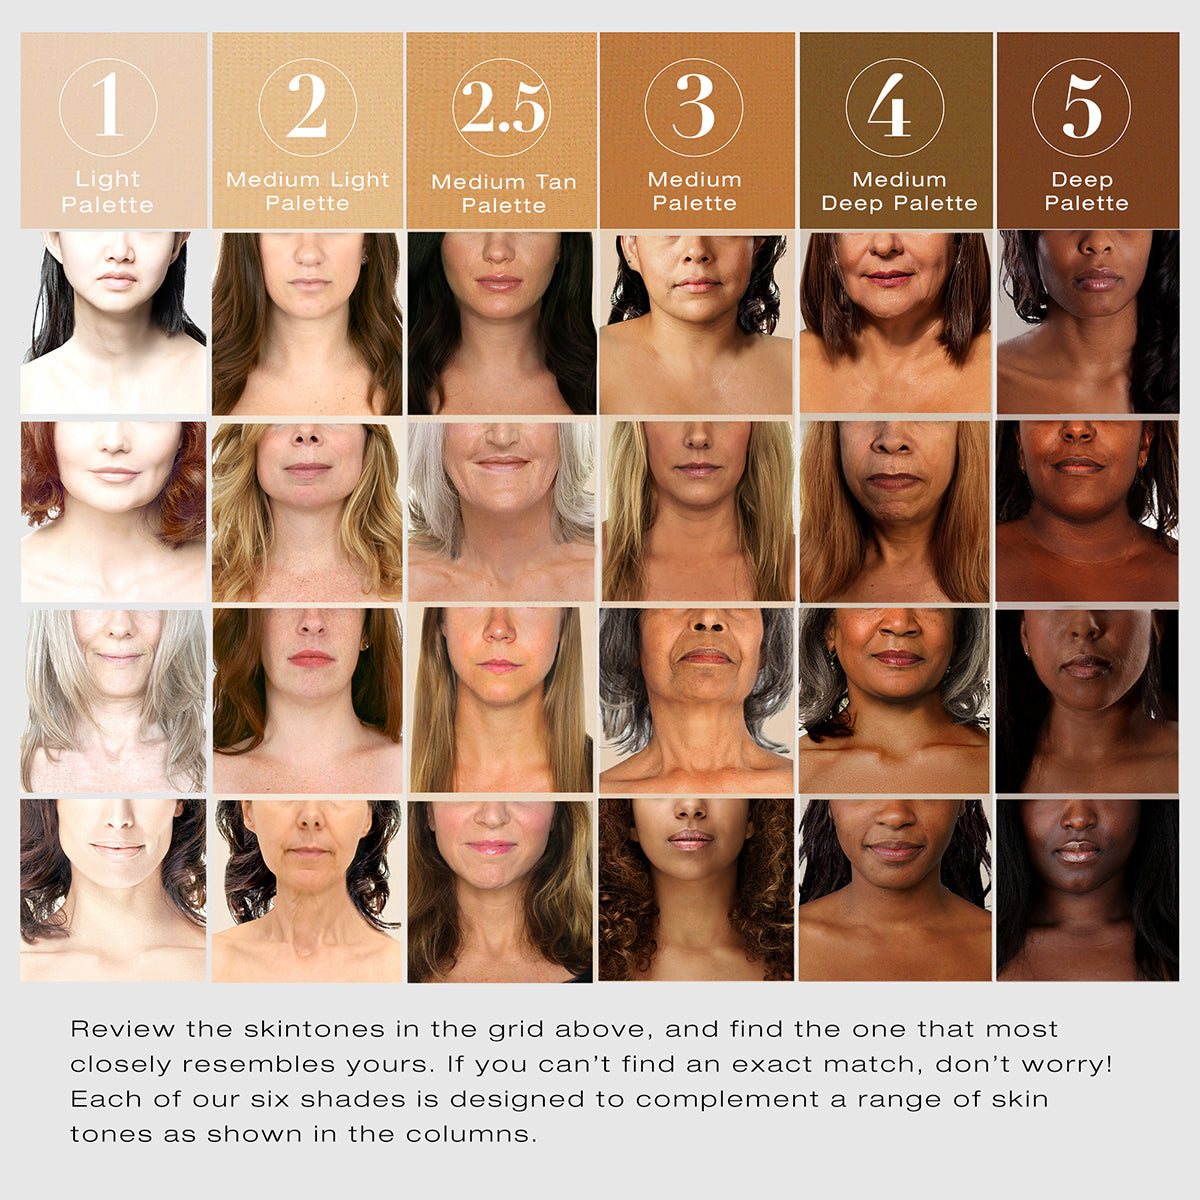 Review the skintones in the grid above, and find the one that most closely resembles yours. If you can't find an exact match, don't worry! Each of our six shades is designed to complement a range of skin tones as shown in the columns. 1 Light palette, 2 Medium LIght palette, 2.5 Medium tan palette, 3 medium palette, 4 medium deep palette, 5 deep palette